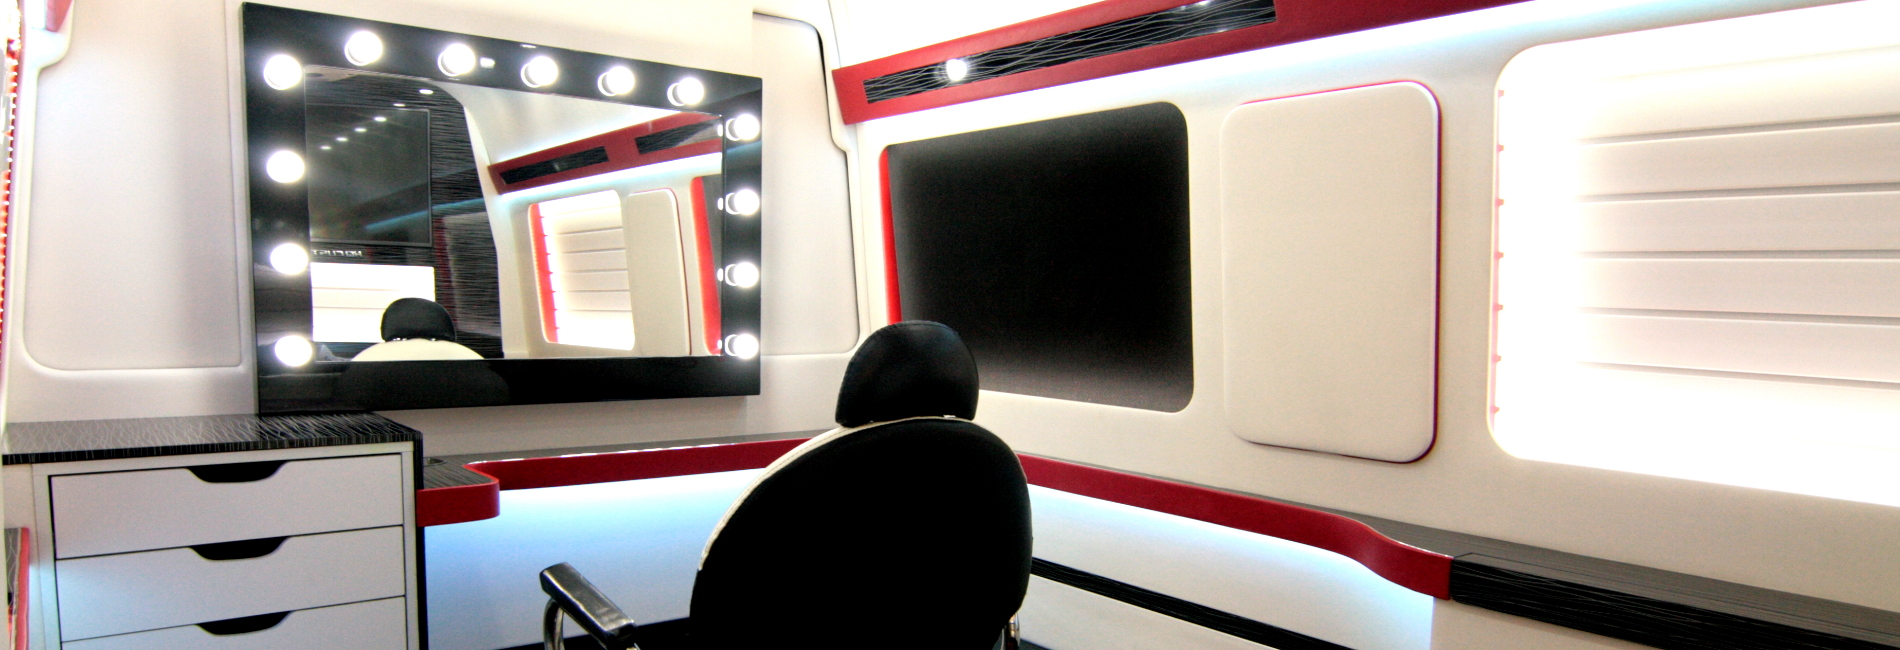 A mobile hair salon that features an opulent and spacious interior with amenities set up for clients.